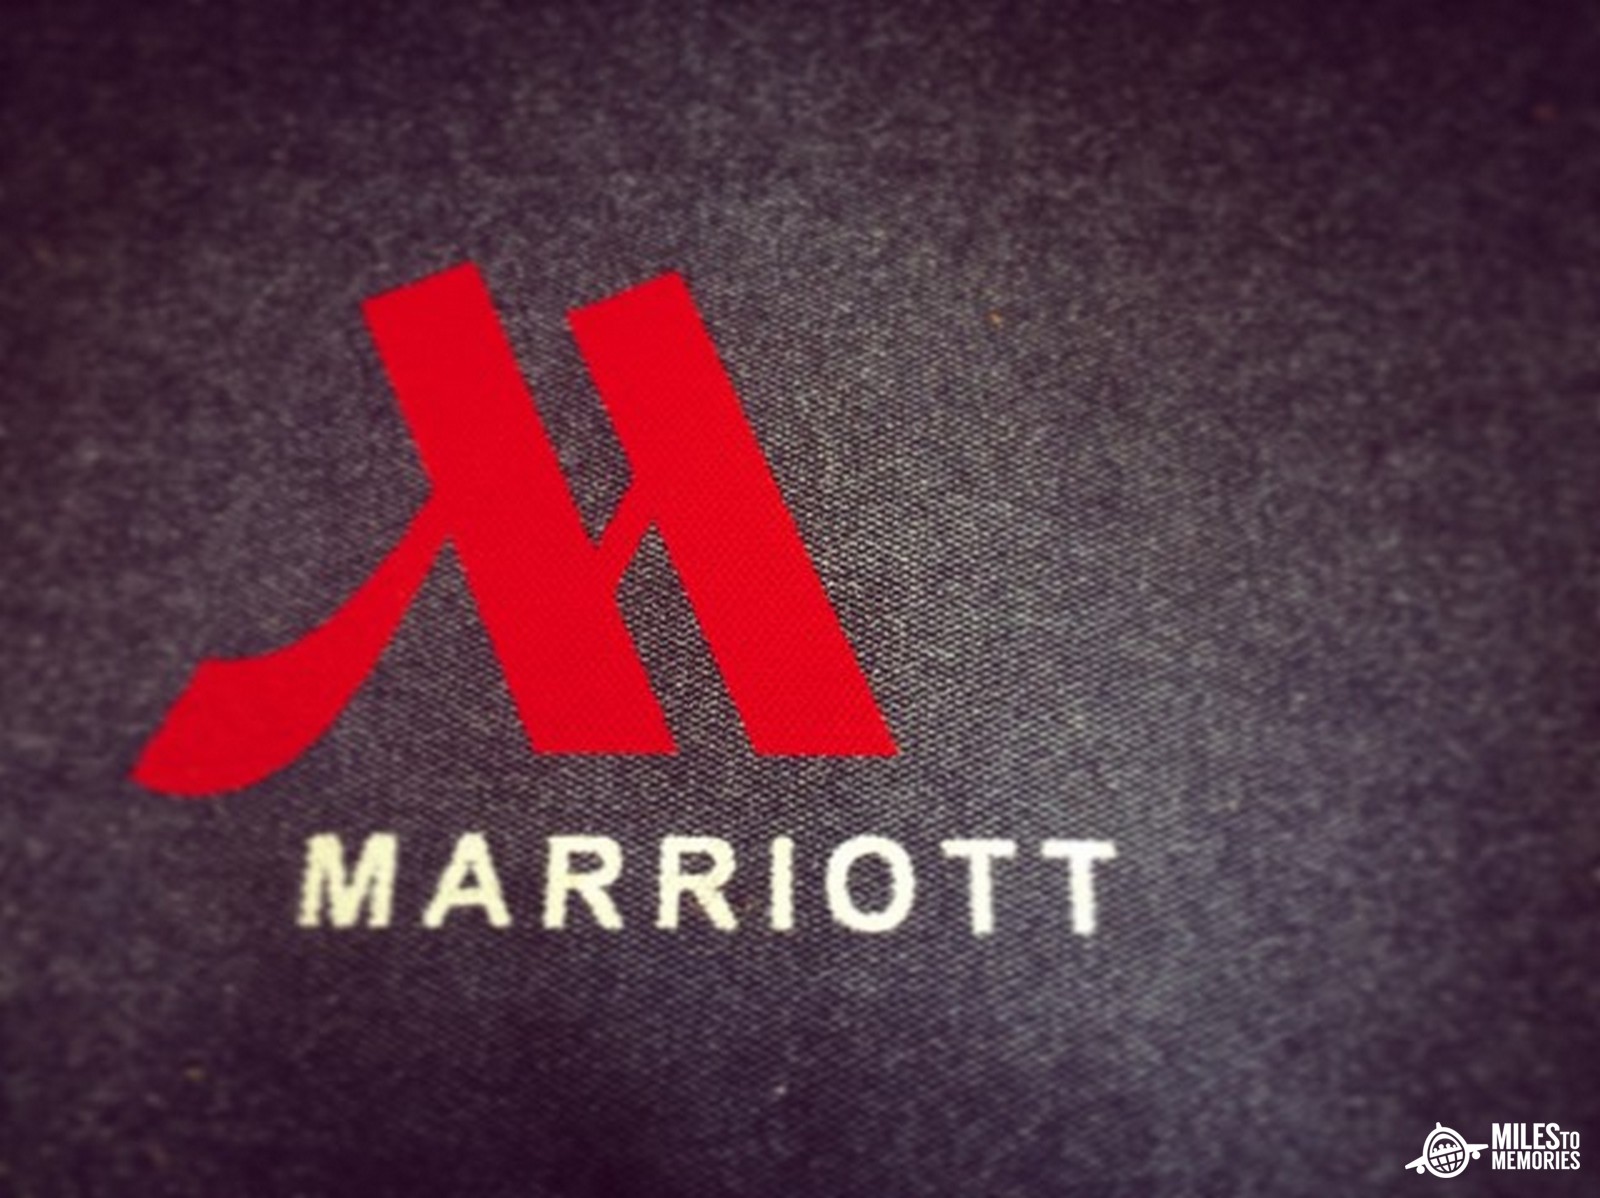 It's Possible To Get Marriott 5th Night Free After The Fact - Here's How